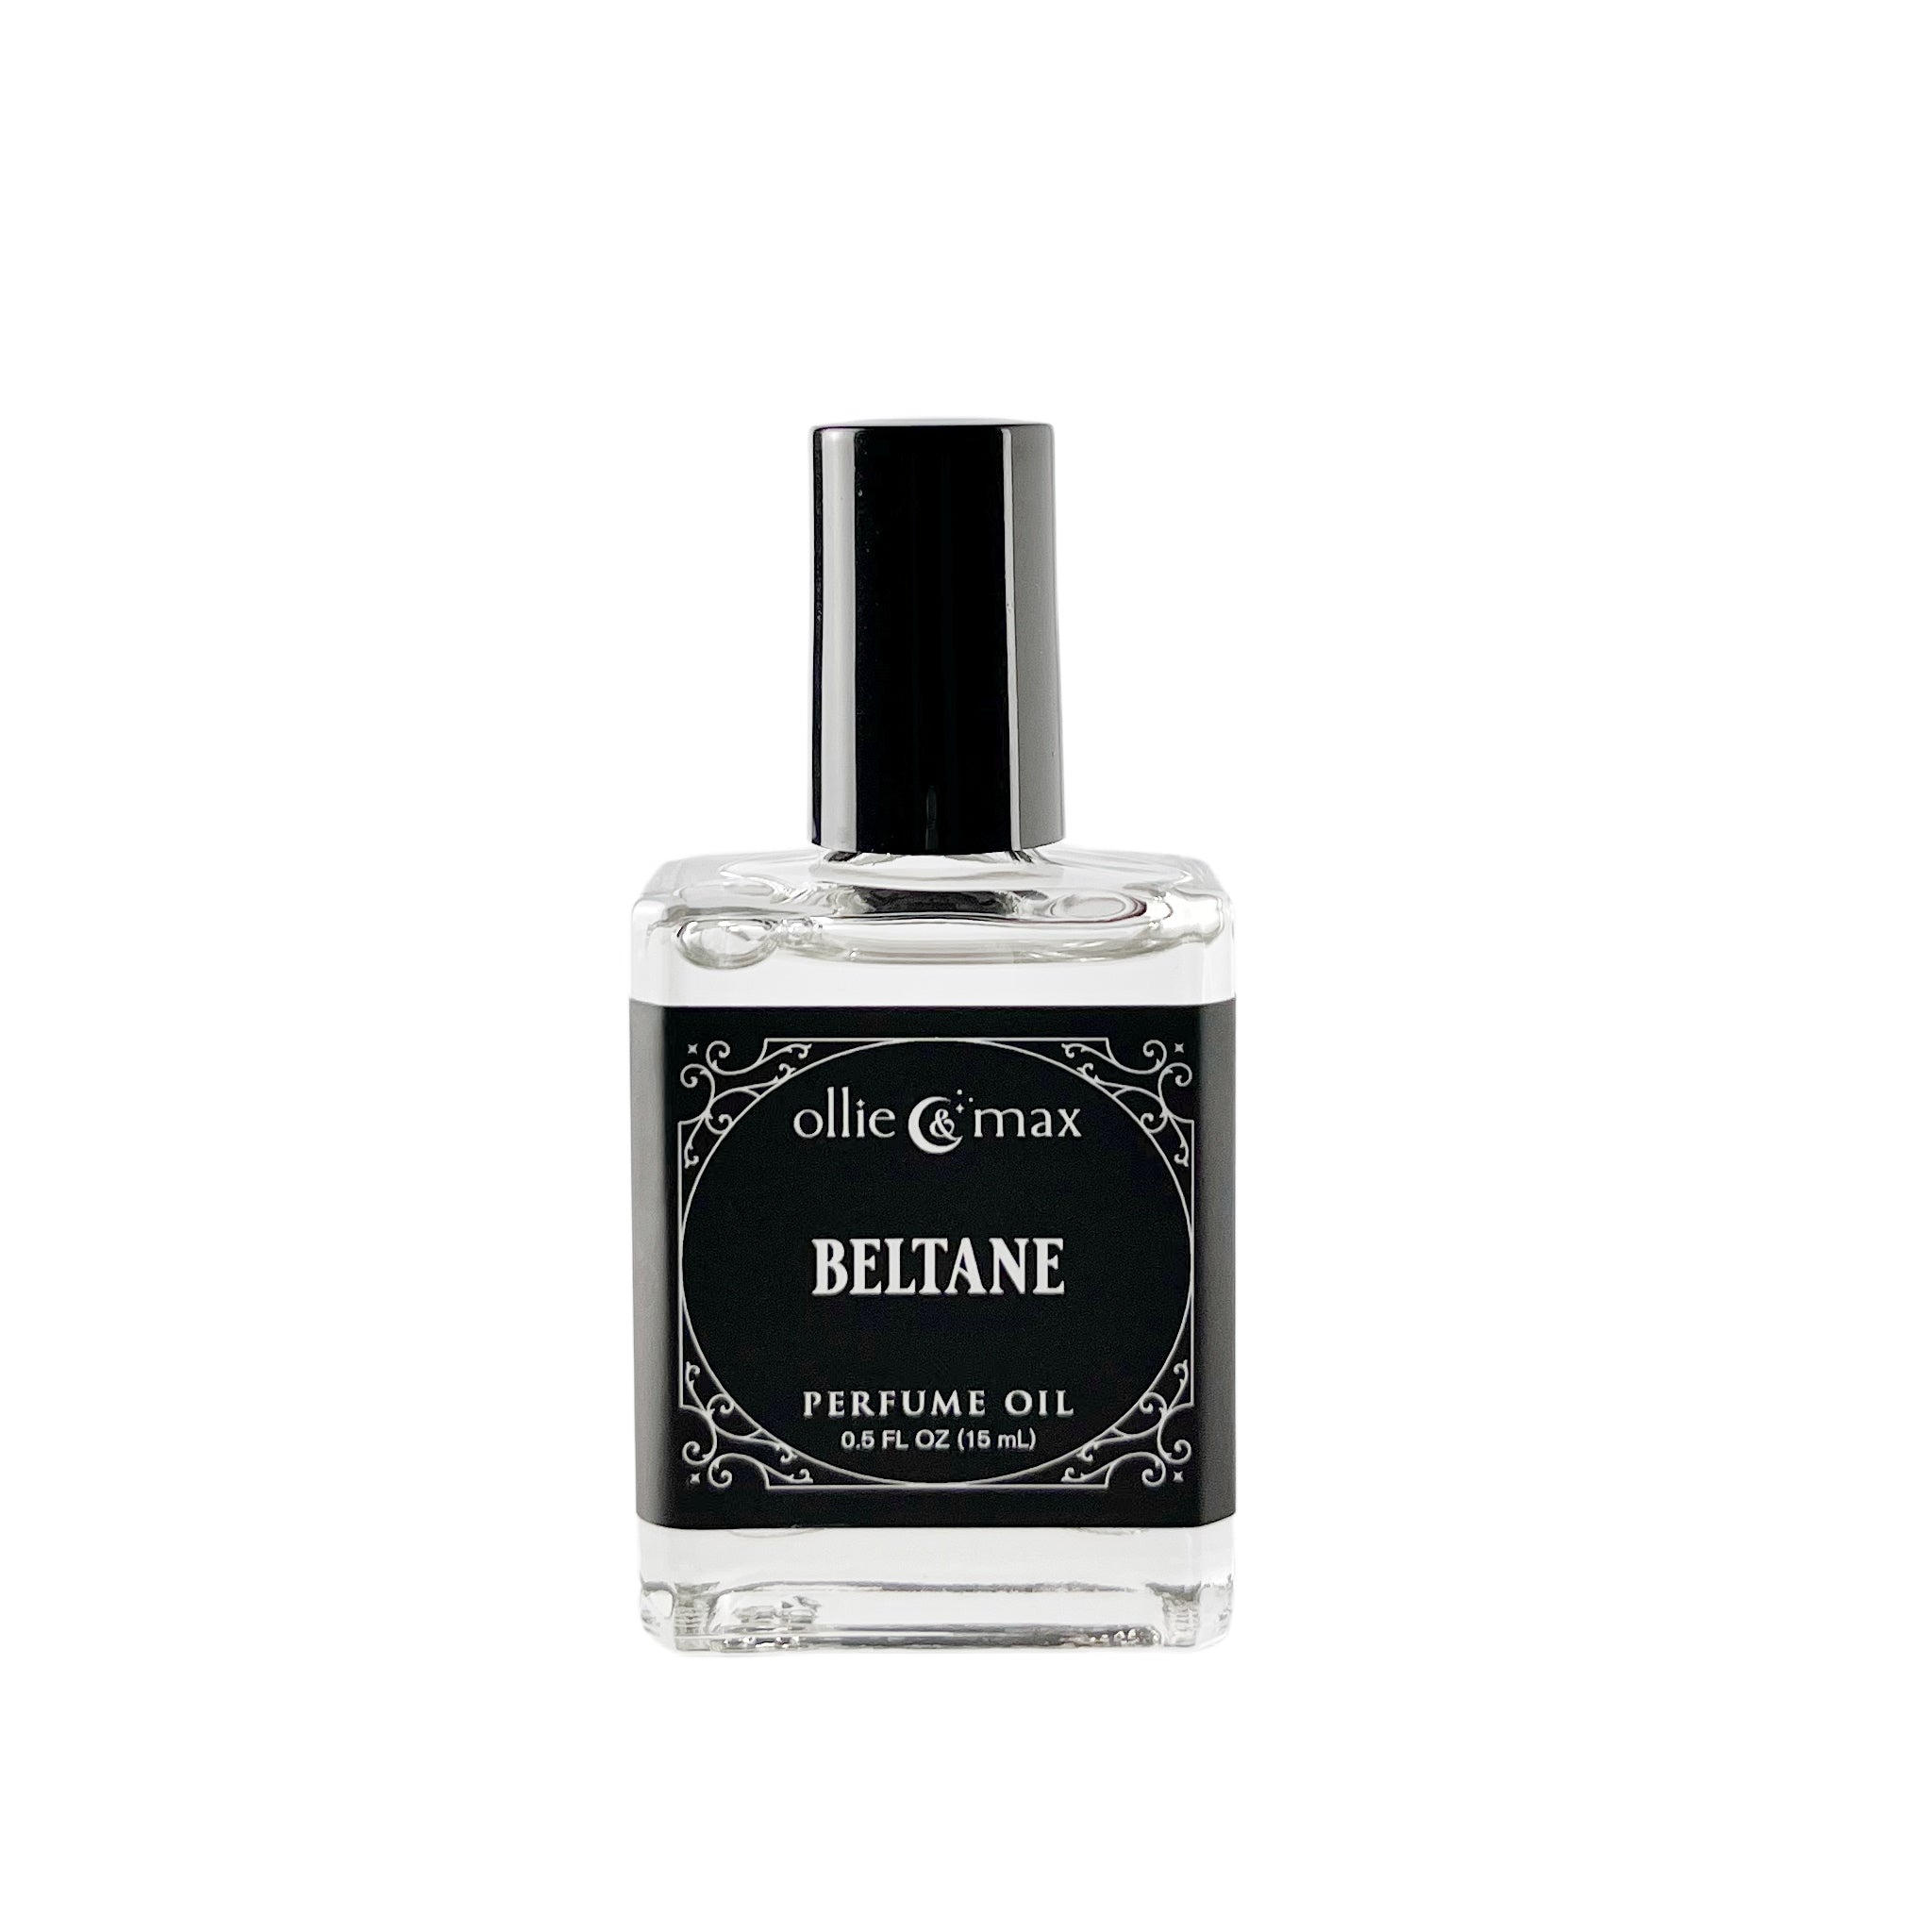 Beltane perfume, 15ml, glass rectangle bottle with black cap and black and silver label. 